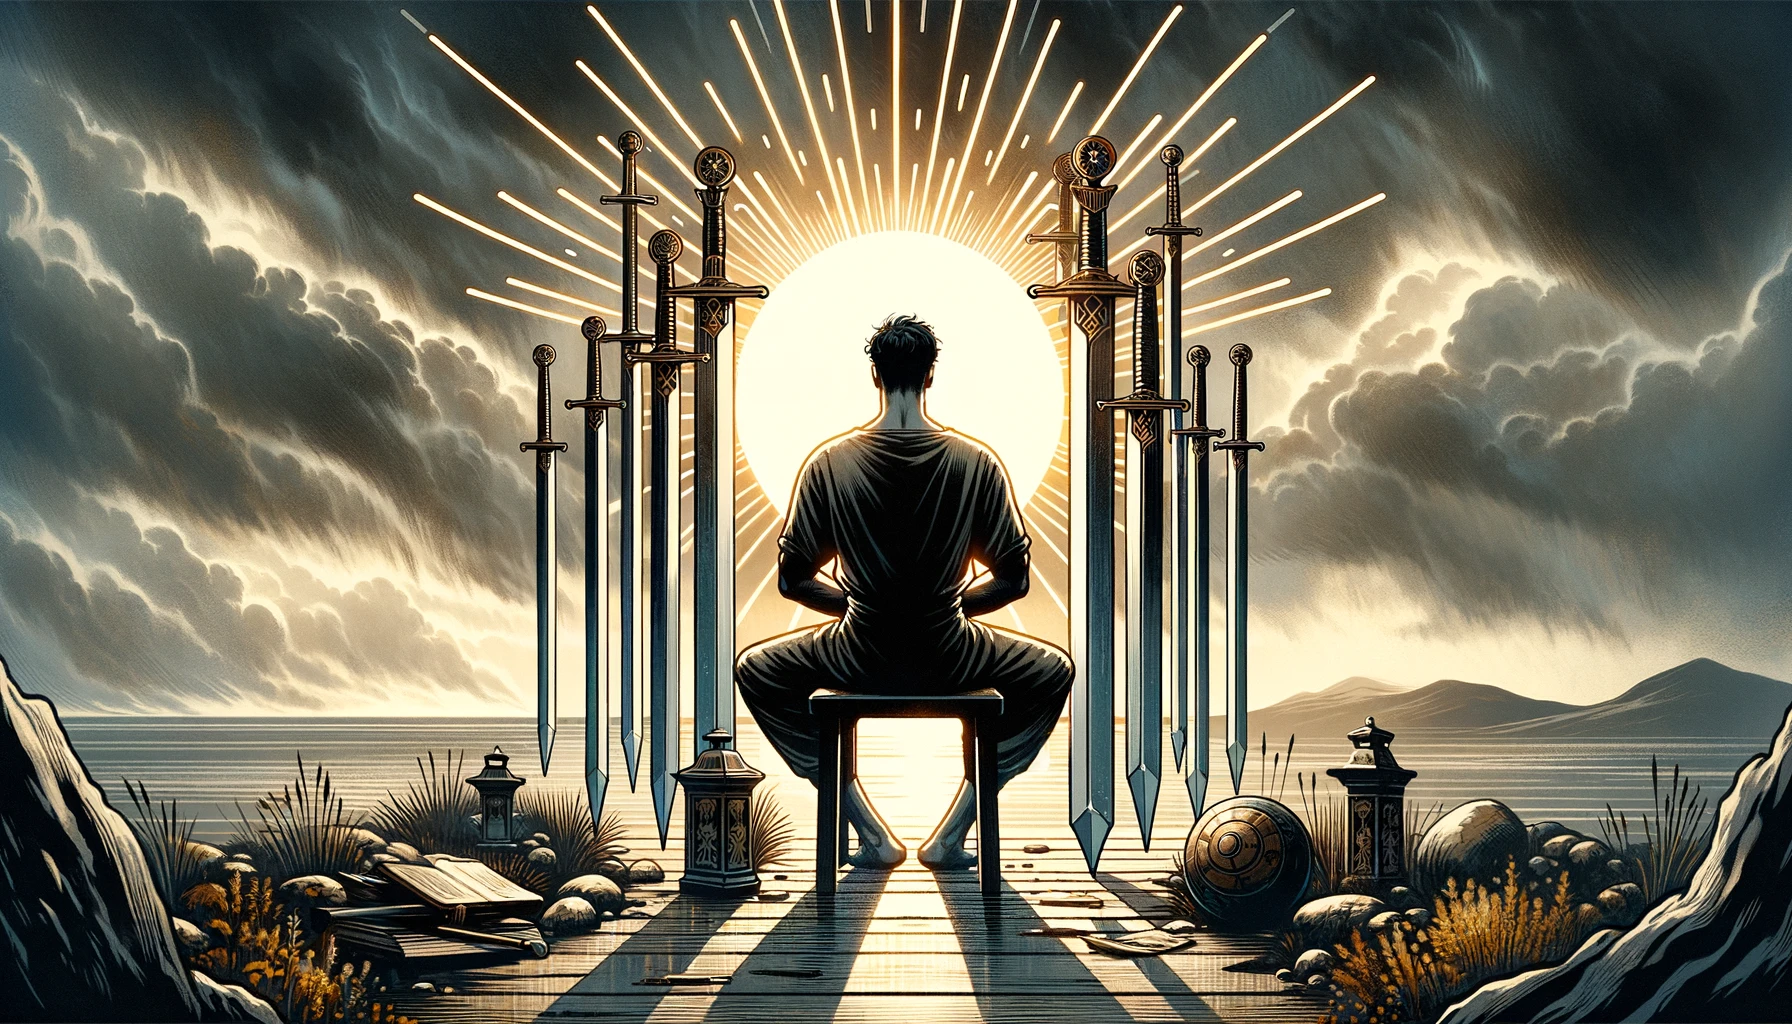 "The image features a person lying on the ground, surrounded by swords, indicating betrayal and loss, yet with the rising sun hinting at hope, renewal, and the potential for new beginnings amidst the desolate landscape."